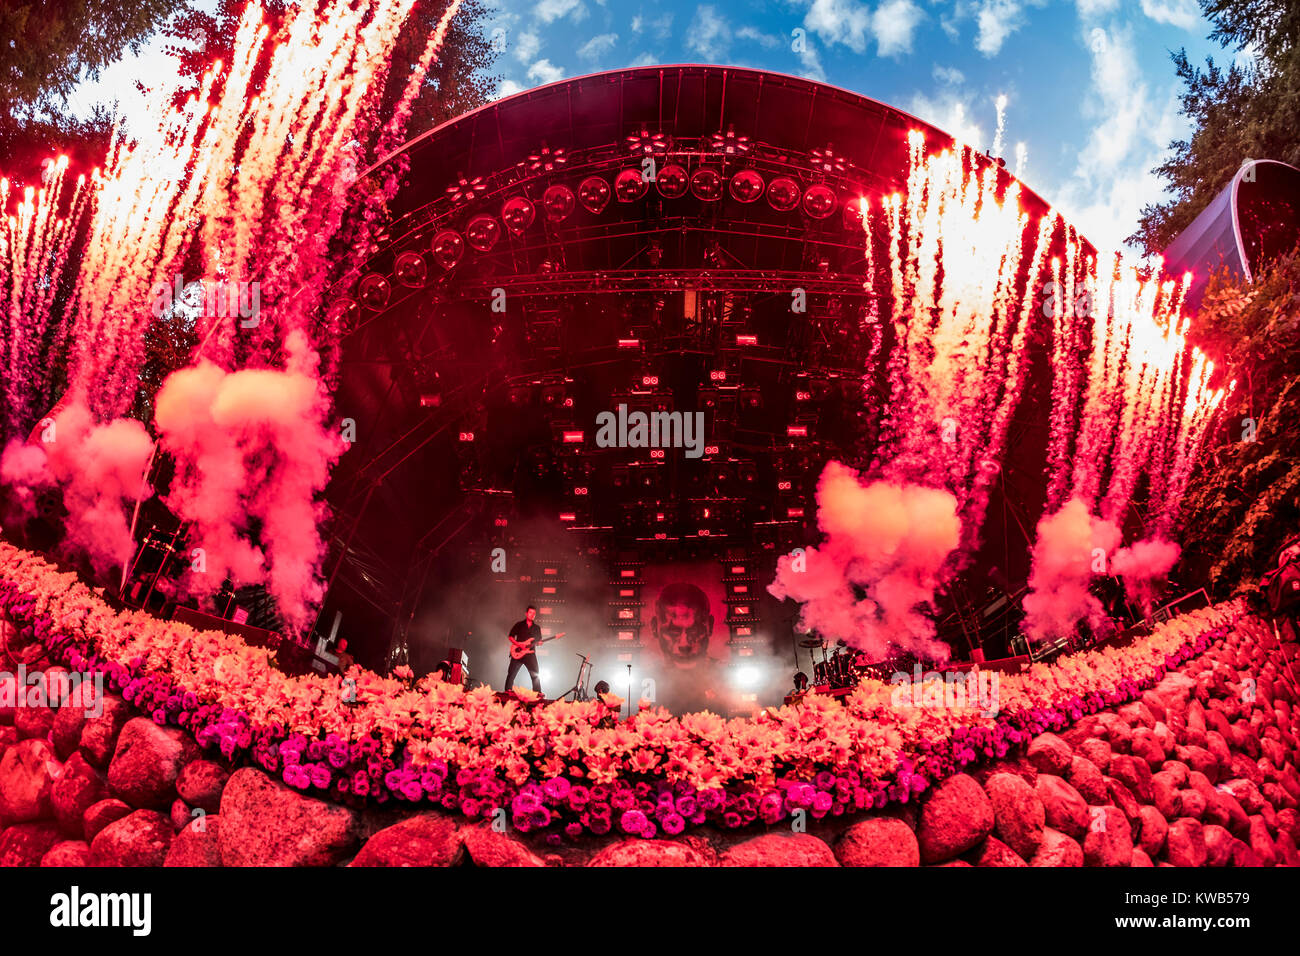 Denmark, Skanderborg - August 9, 2017. An amazing fireworks display on stage as part of the live concert with the Danish rapper L.O.C. during the Danish music festival SmukFest 2017. Stock Photo